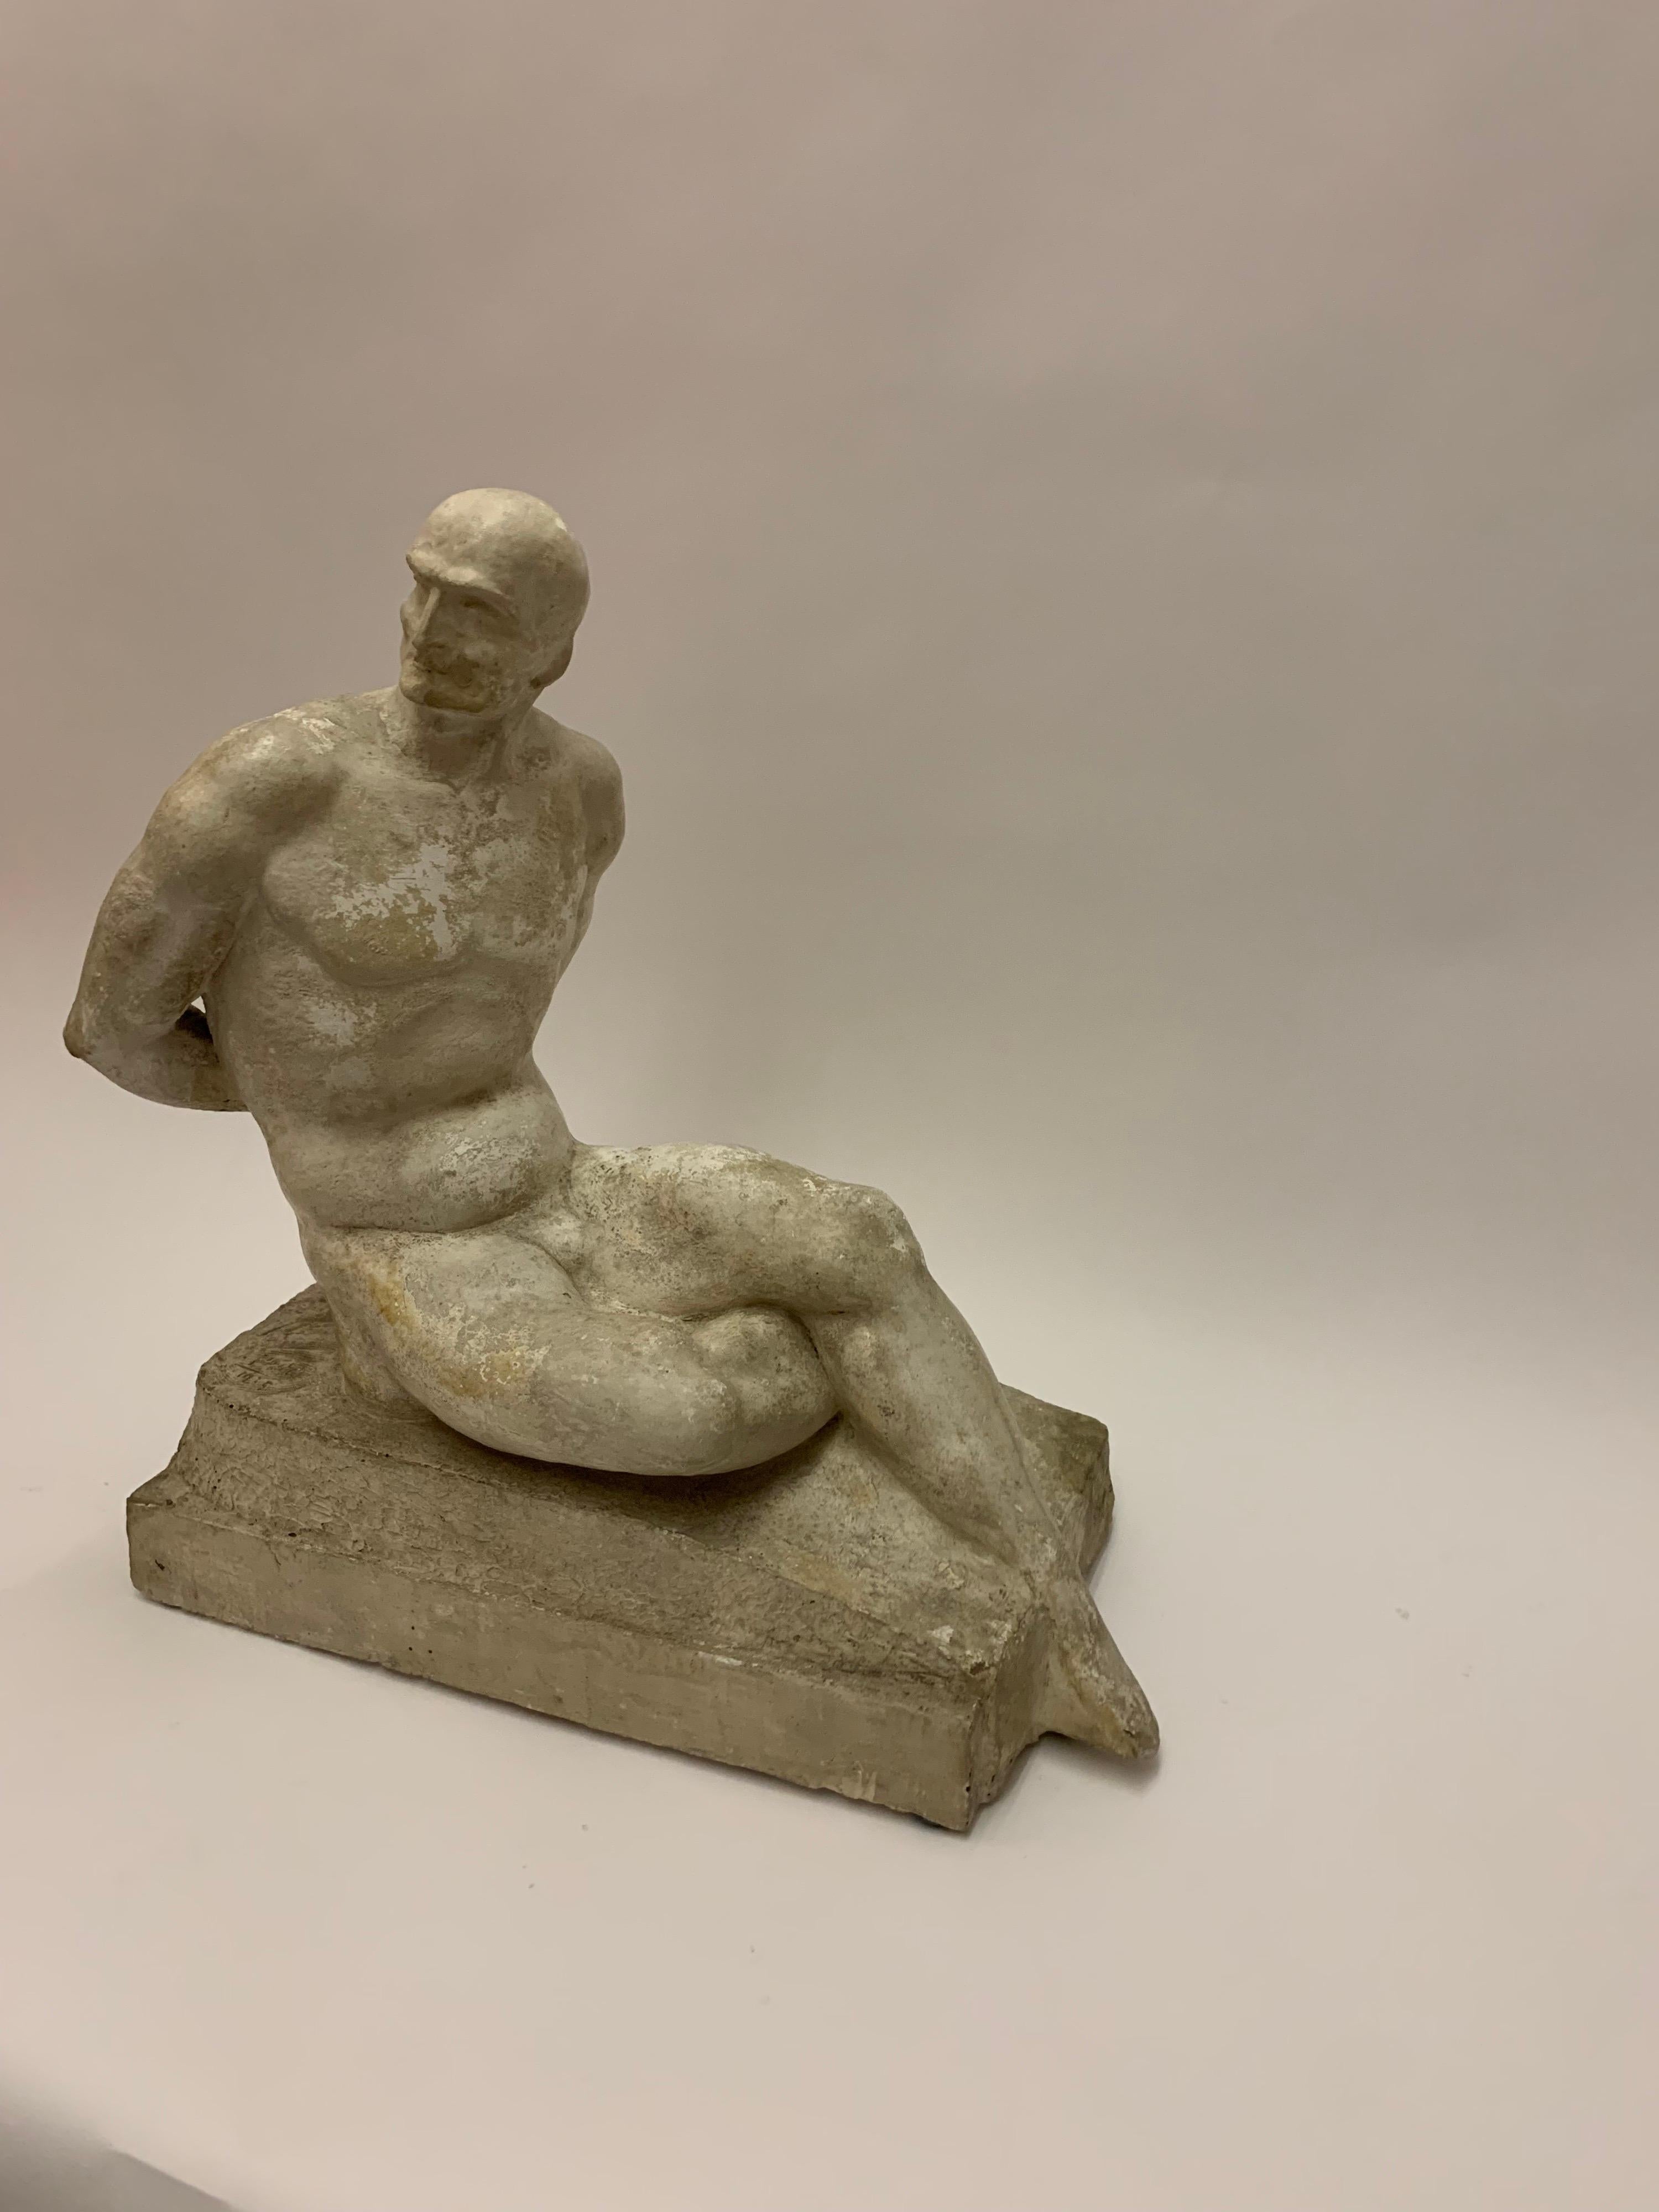 Sculpture of a man in plaster.

Property from esteemed interior designer Juan Montoya. Juan Montoya is one of the most acclaimed and prolific interior designers in the world today. Juan Montoya was born and spent his early years in Colombia. After